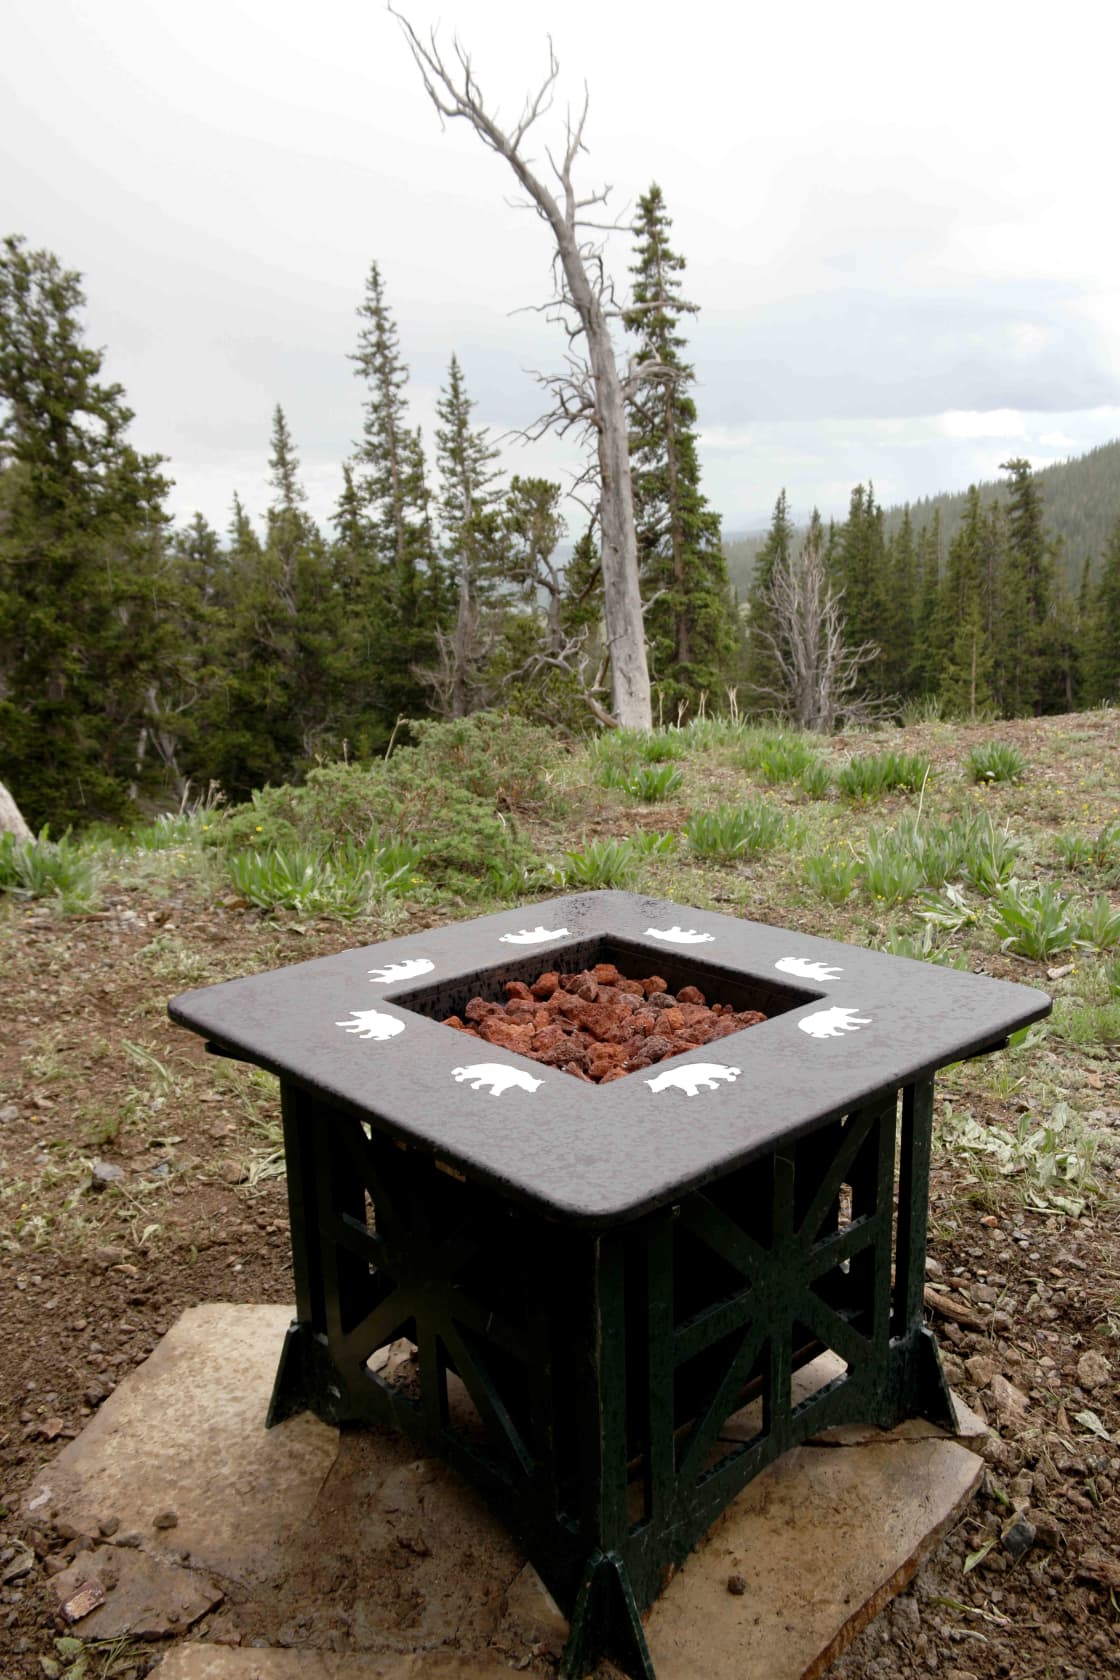 Propane Fire pit.  Its just not camping without a fire!  This is the only type of fire pit allowed during a fire ban.